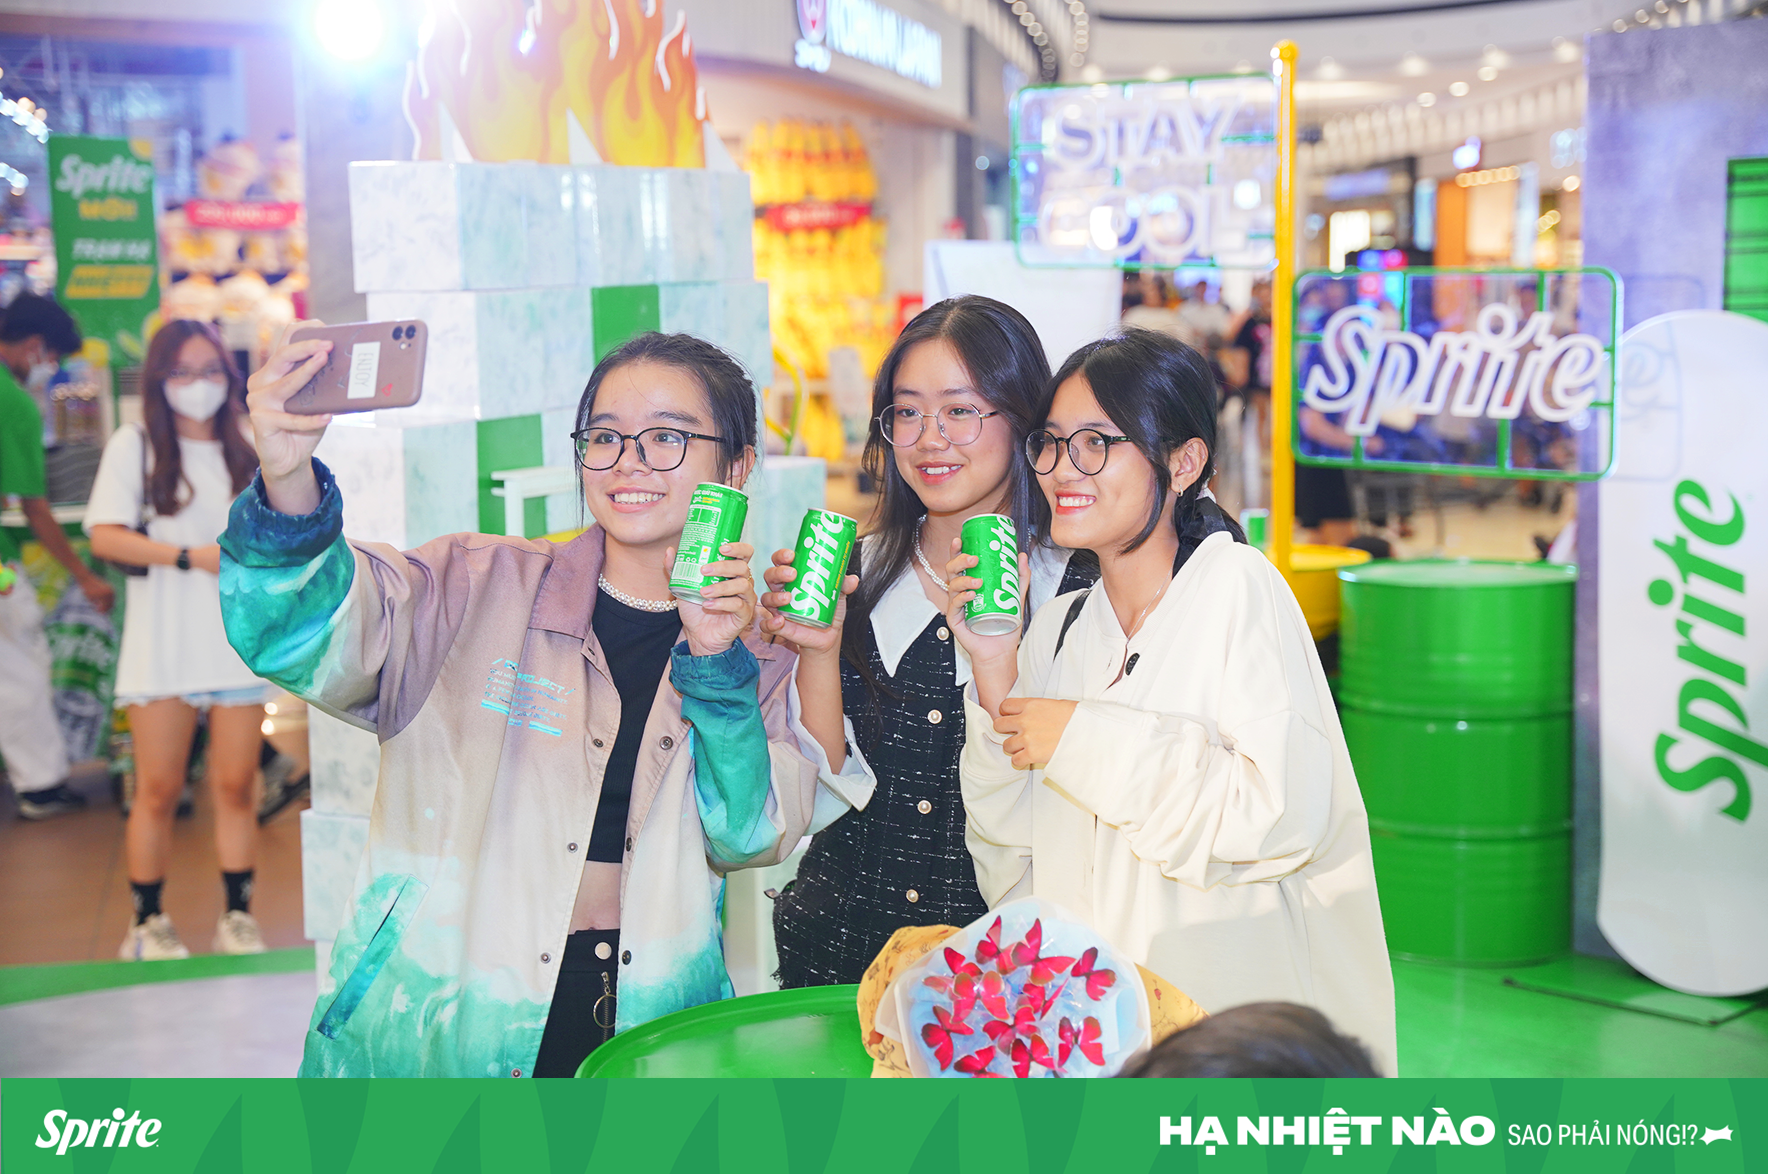 Sprite reveals new 'Stay cool' campaign